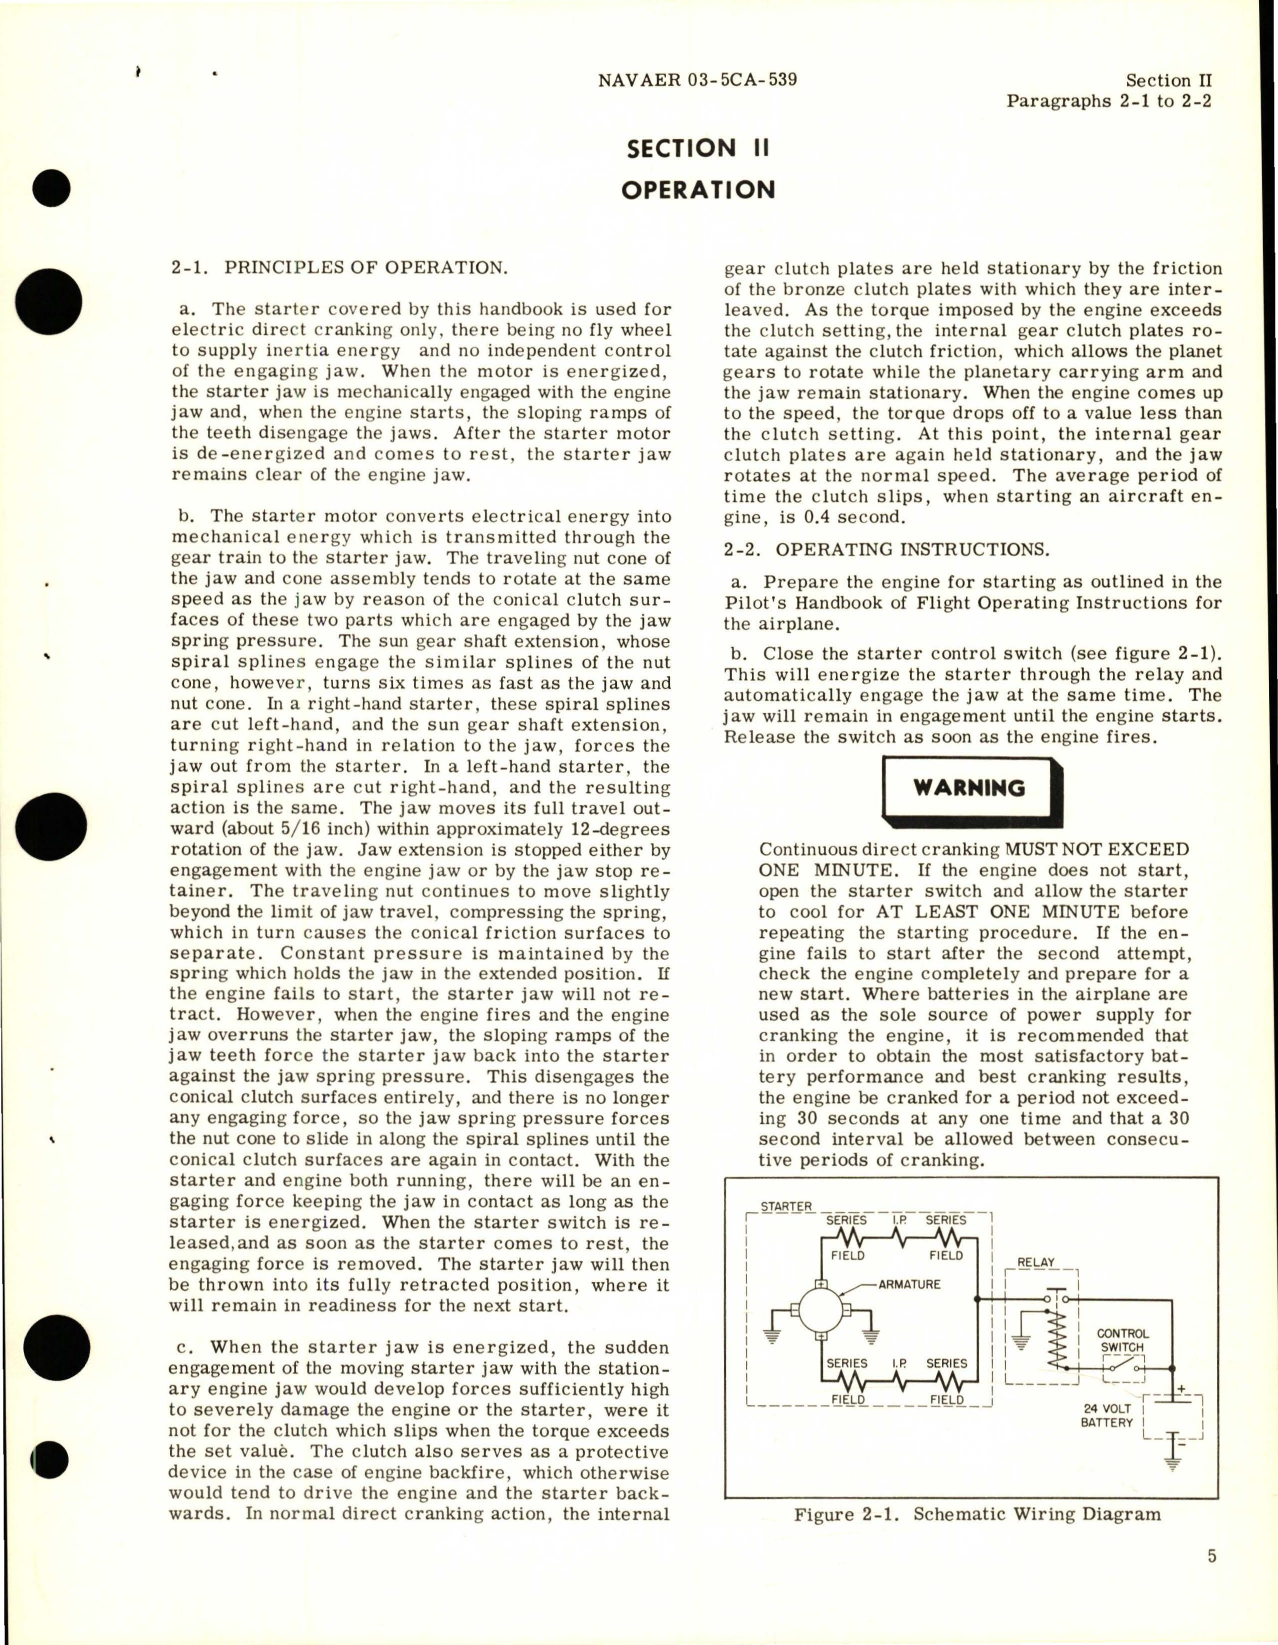 Sample page 9 from AirCorps Library document: Operation and Service Instructions for Engine Starter - Model JH 6 Series